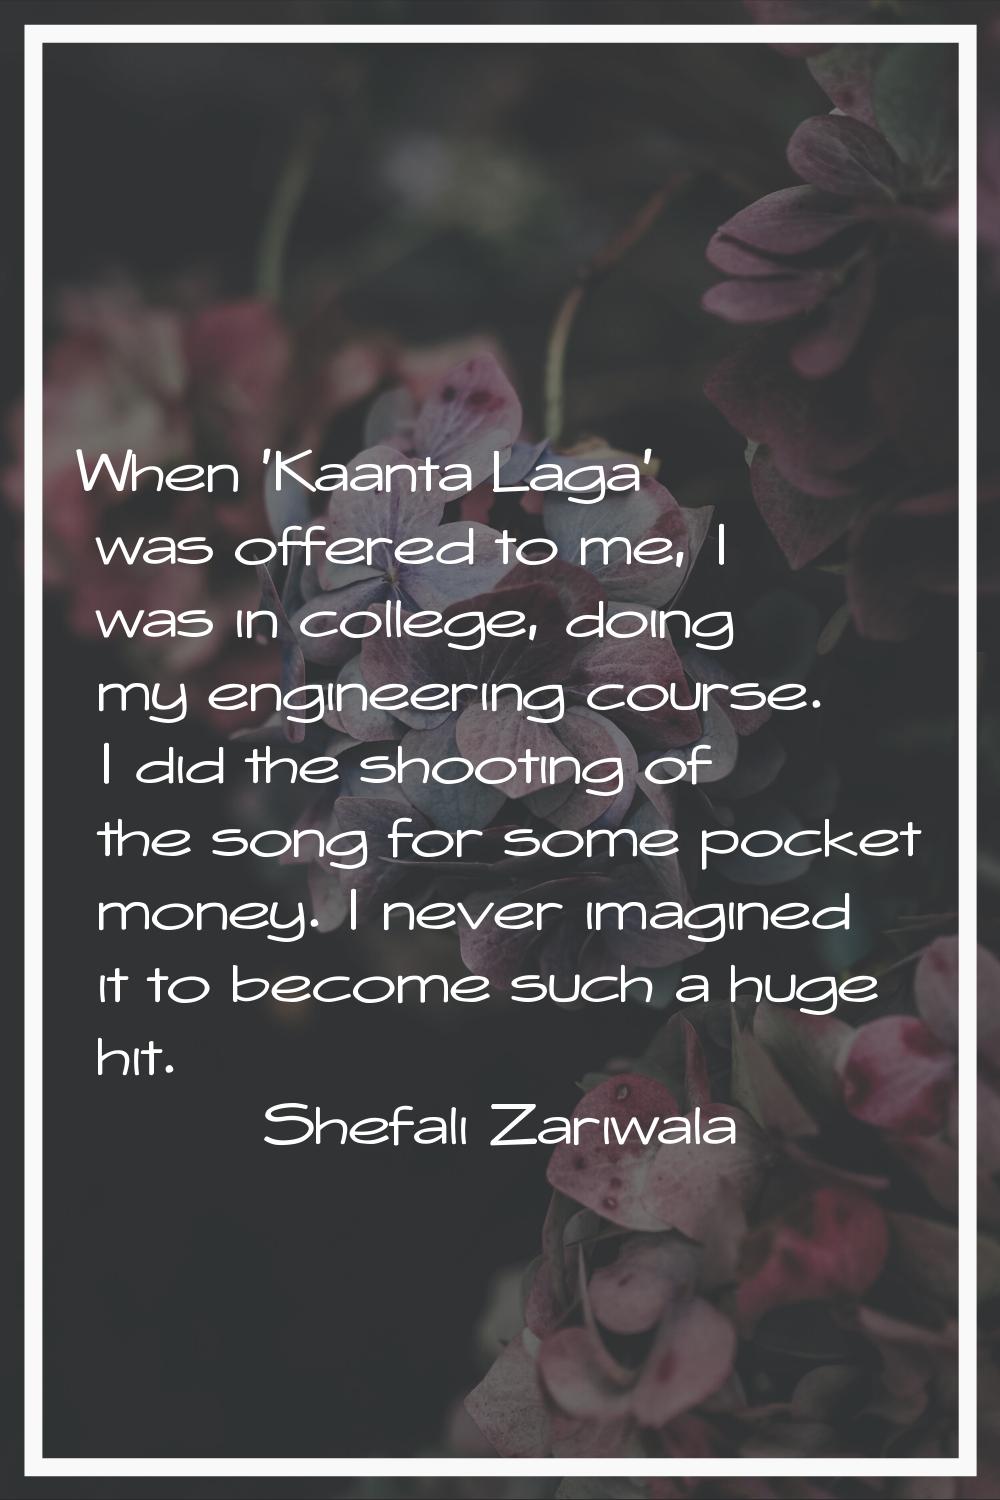 When 'Kaanta Laga' was offered to me, I was in college, doing my engineering course. I did the shoo